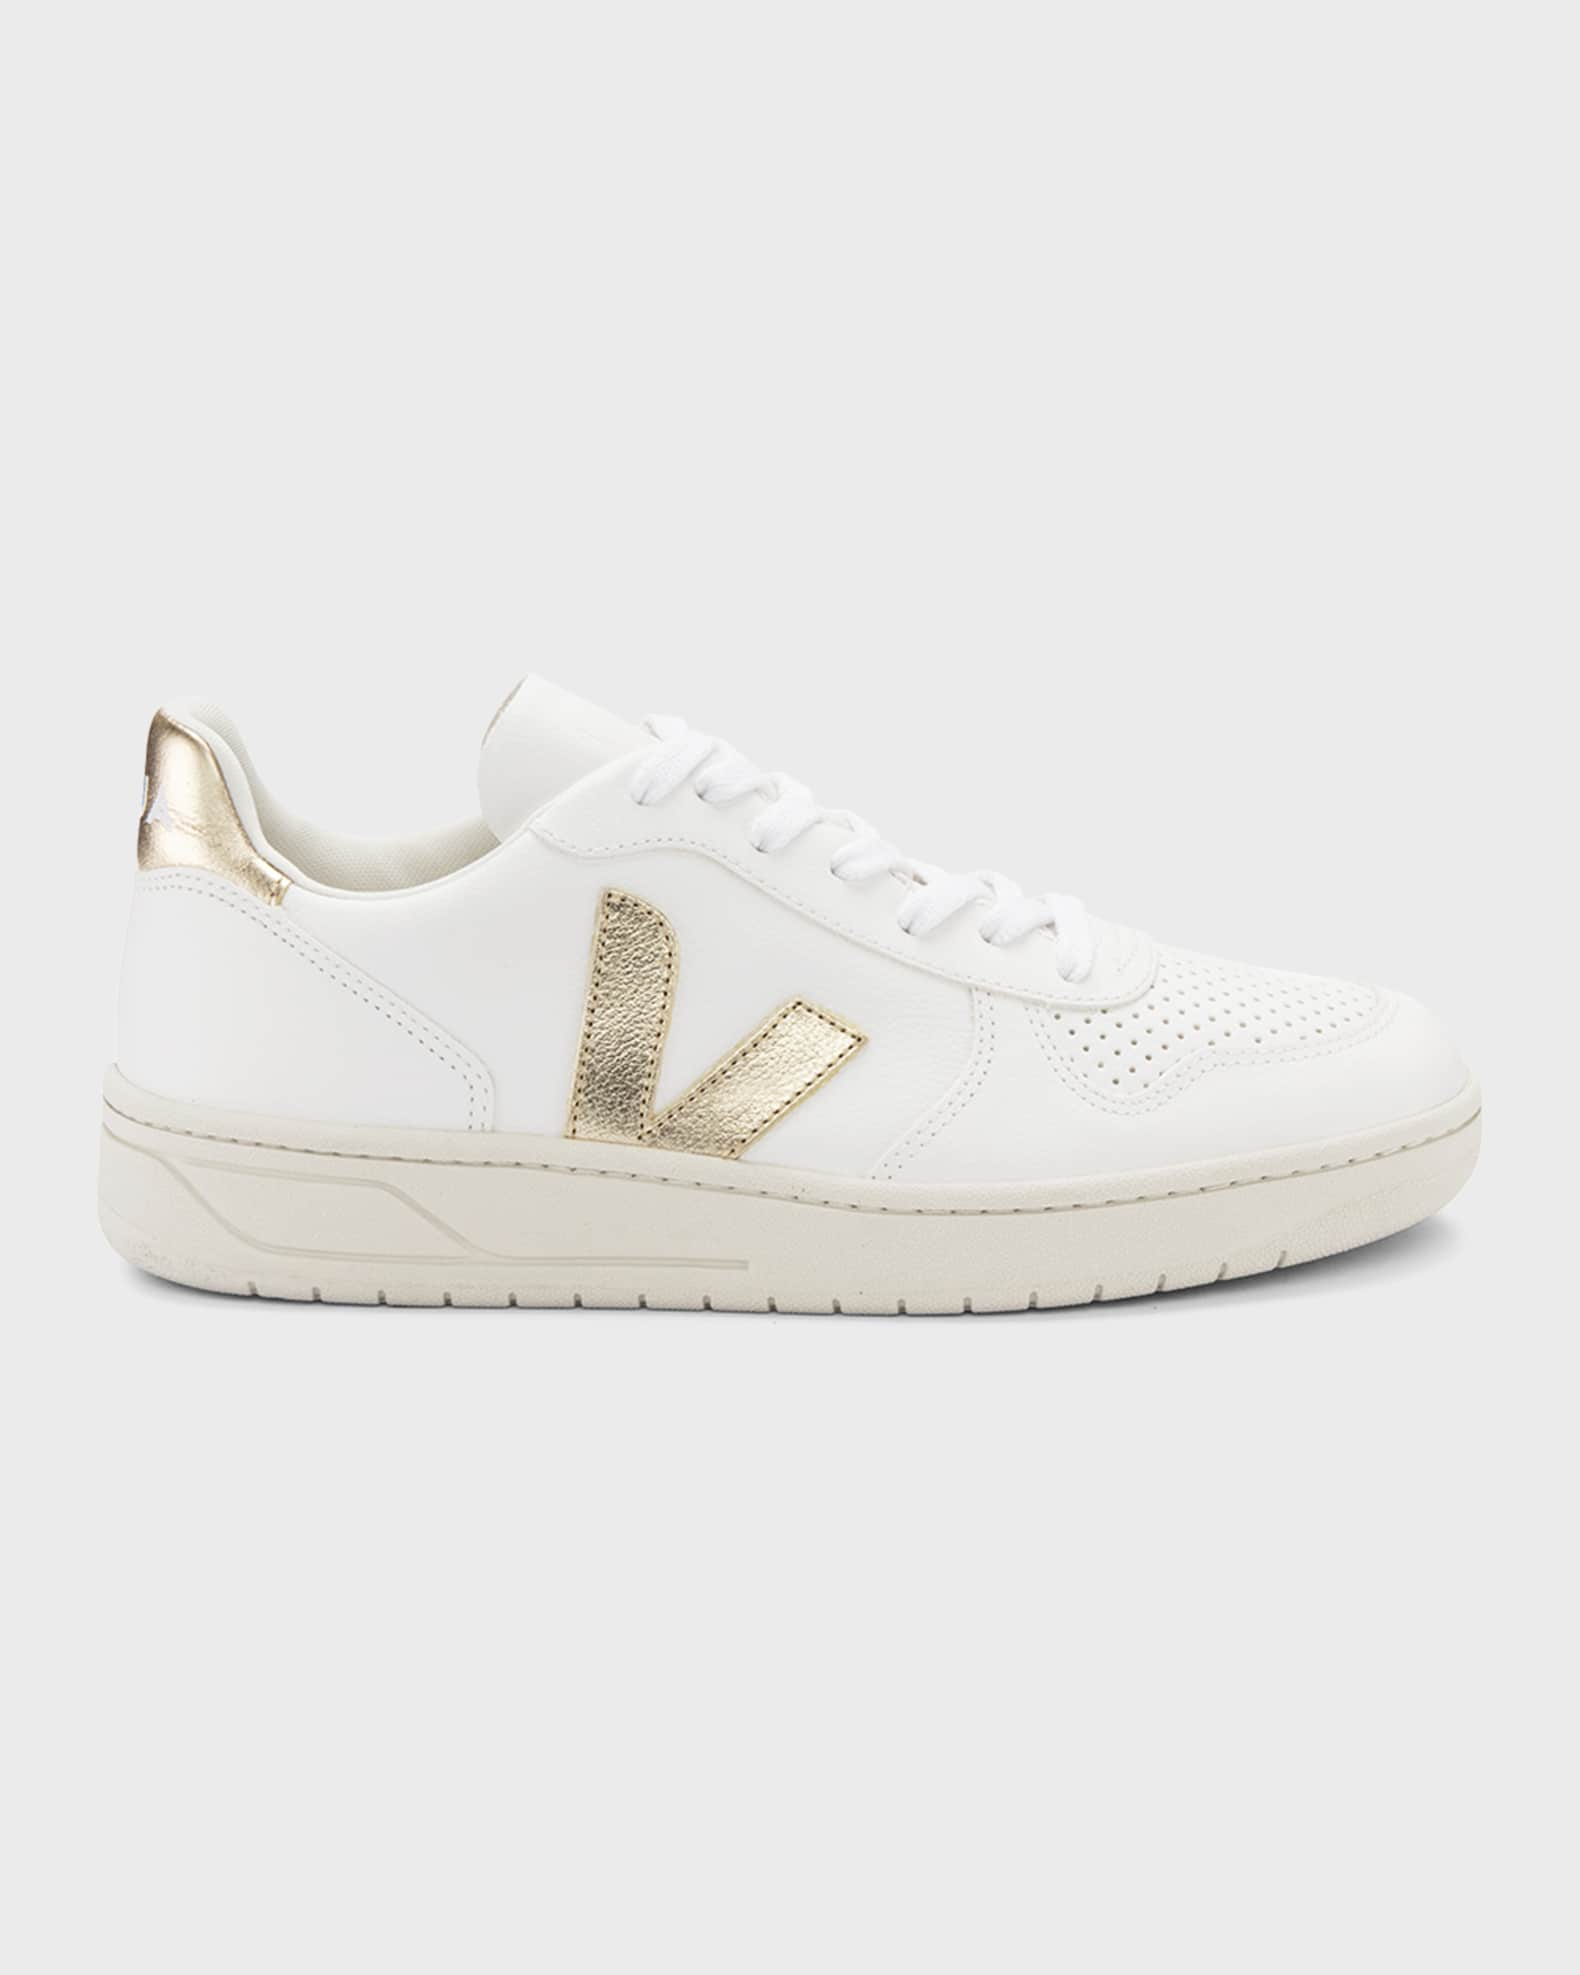 White Veja sneakers with gold